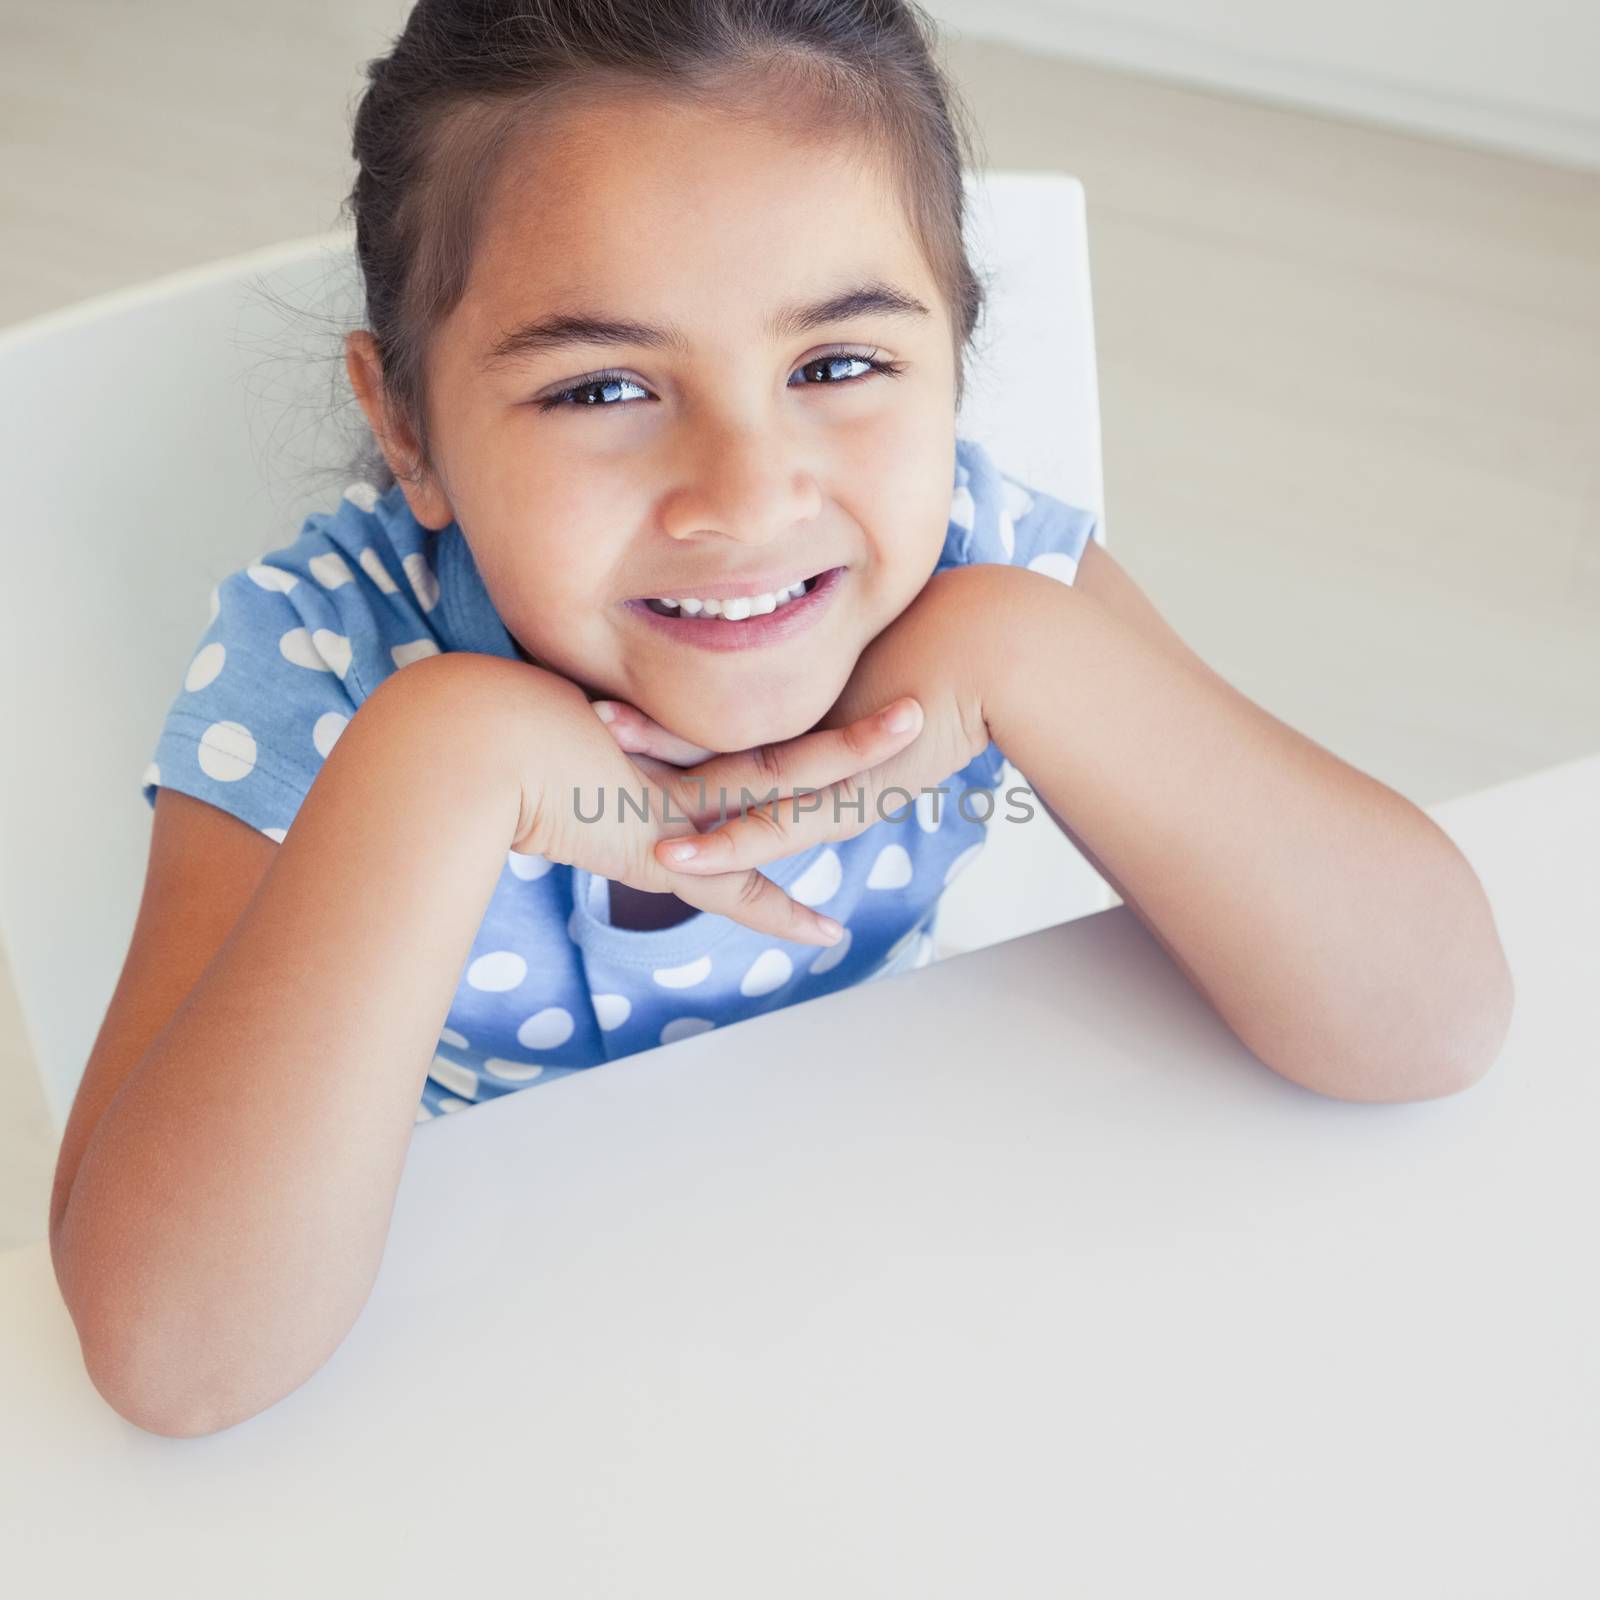 Close-up portrait of a smiling young girl sitting at table